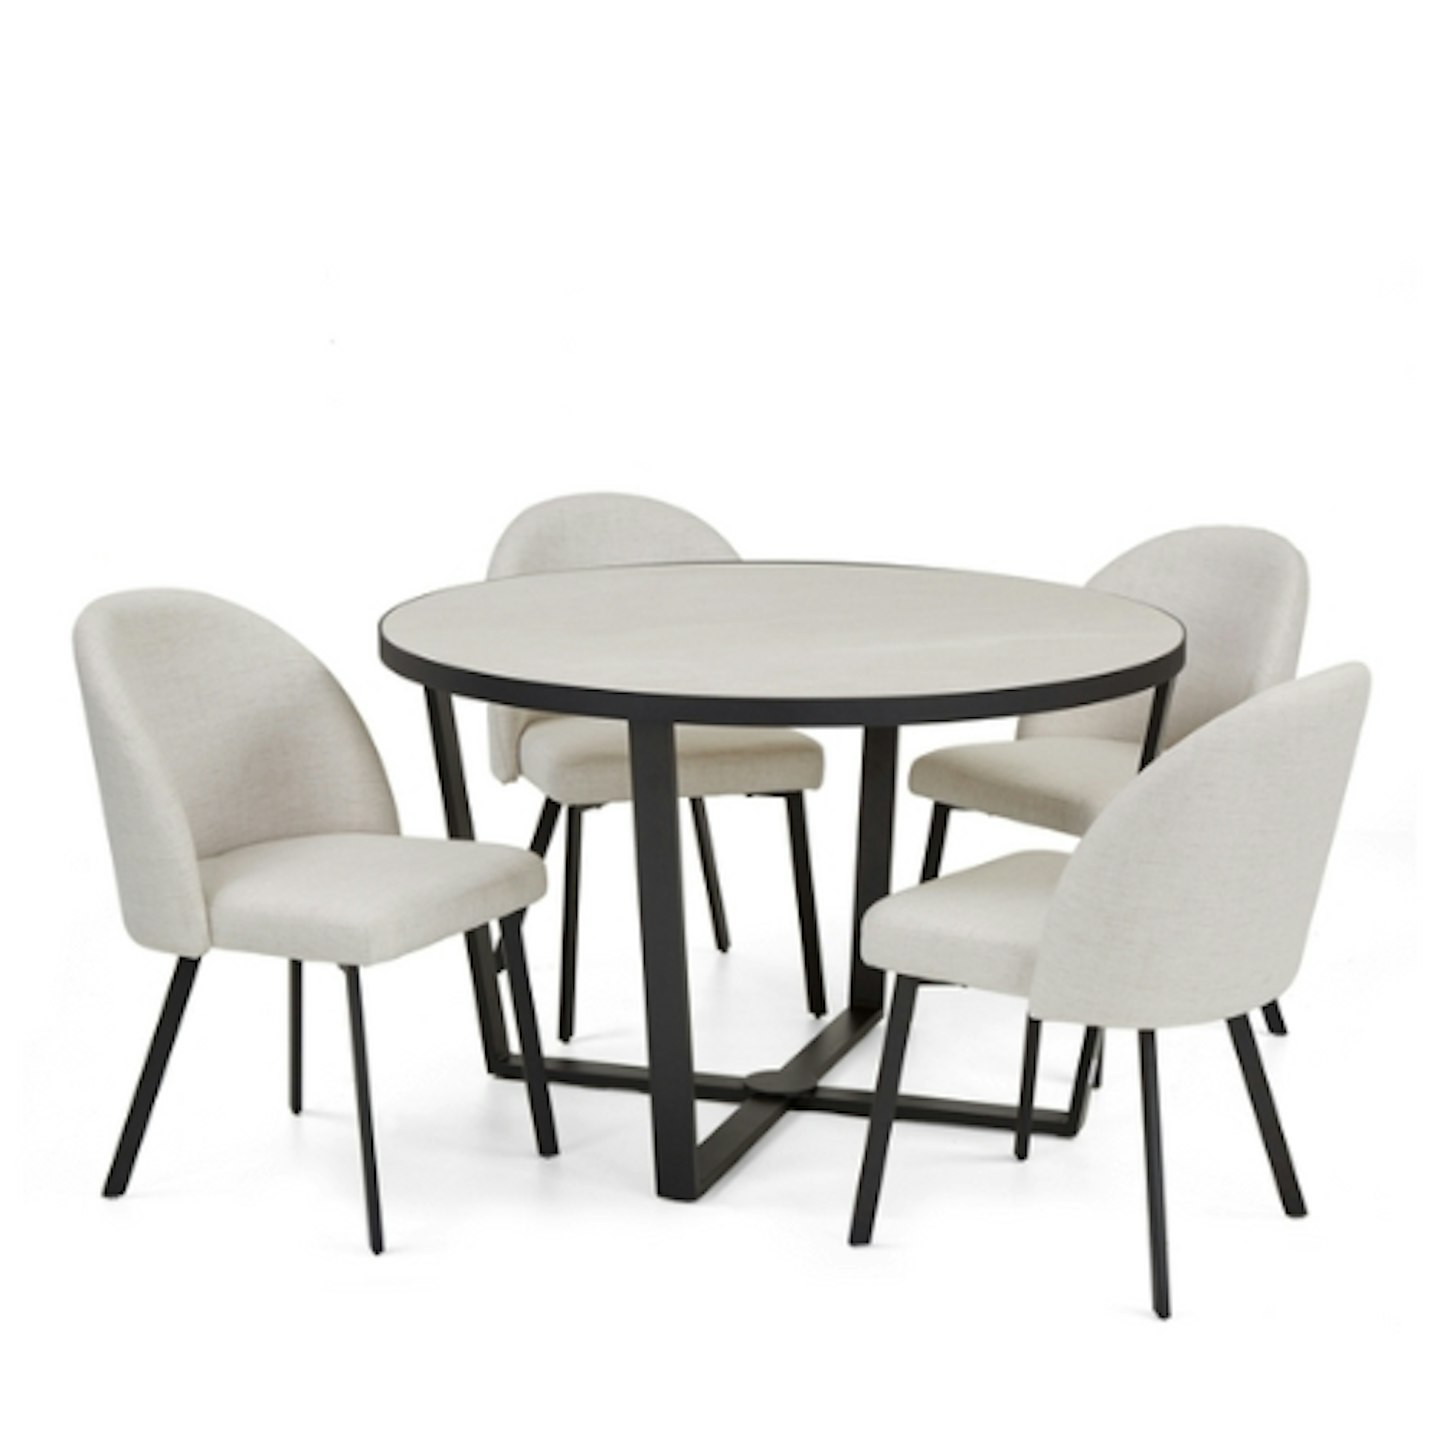 Michelle Keegan Home Cortes Dining Tables And Chairs